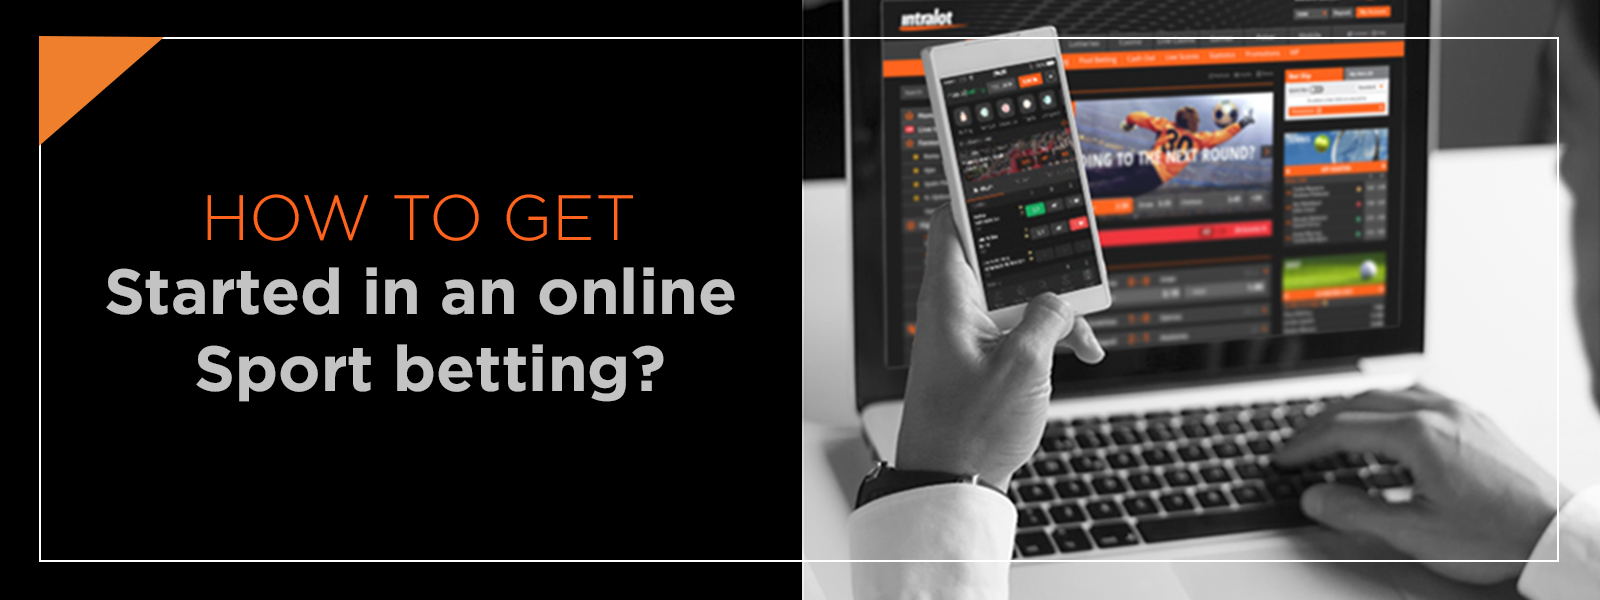 How To Get Started In Online Sports Betting?